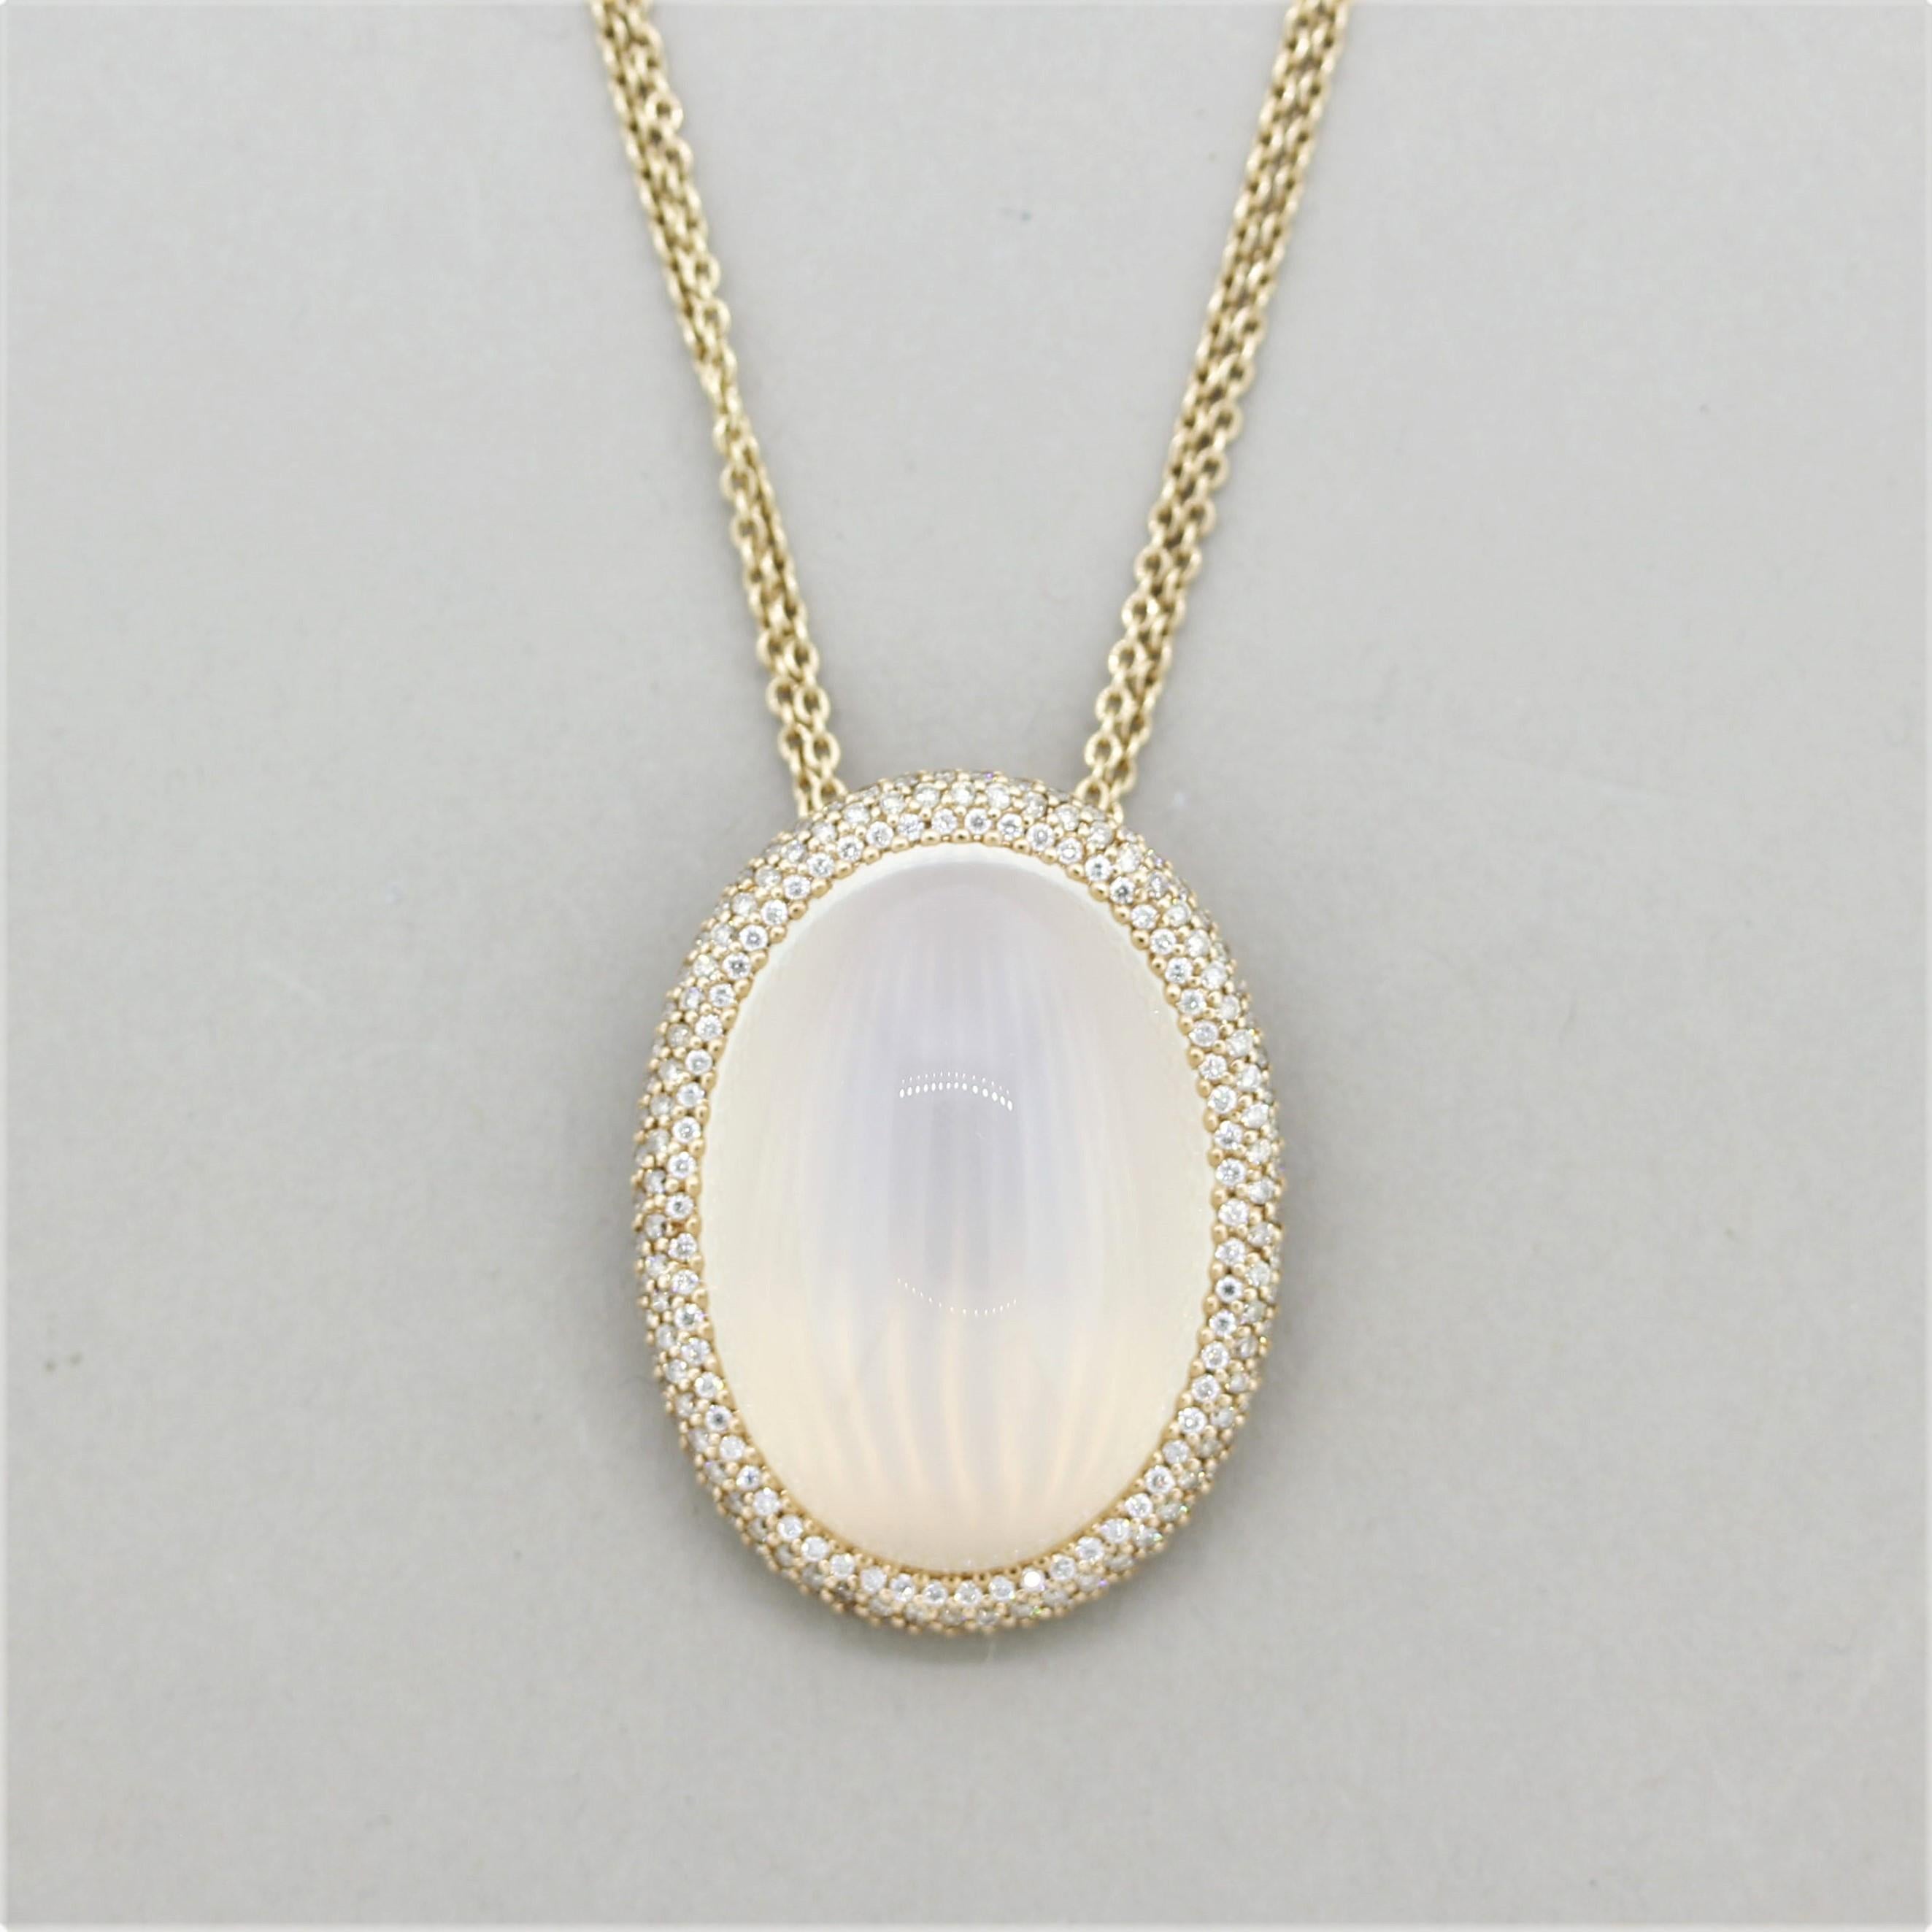 A large and impressive pendant featuring a 54.40 carat moonstone! It has a light and soft cream color that glows in the light. It is accented by 2.62 carats of round brilliant-cut diamonds set around the moonstone. Made in 18k rose gold and comes